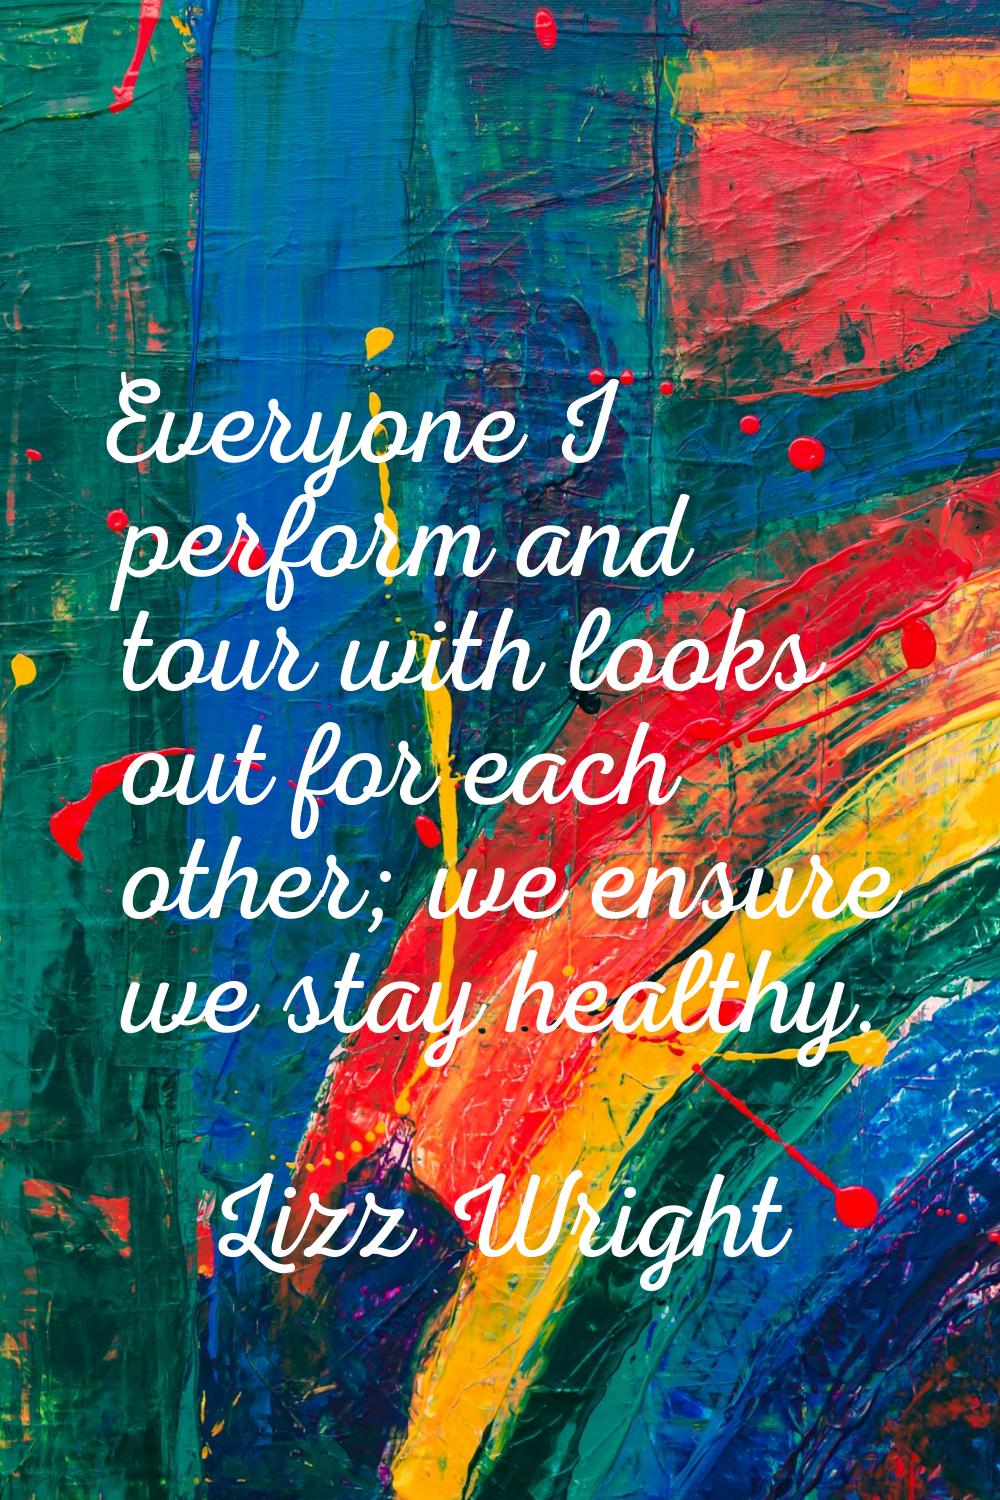 Everyone I perform and tour with looks out for each other; we ensure we stay healthy.